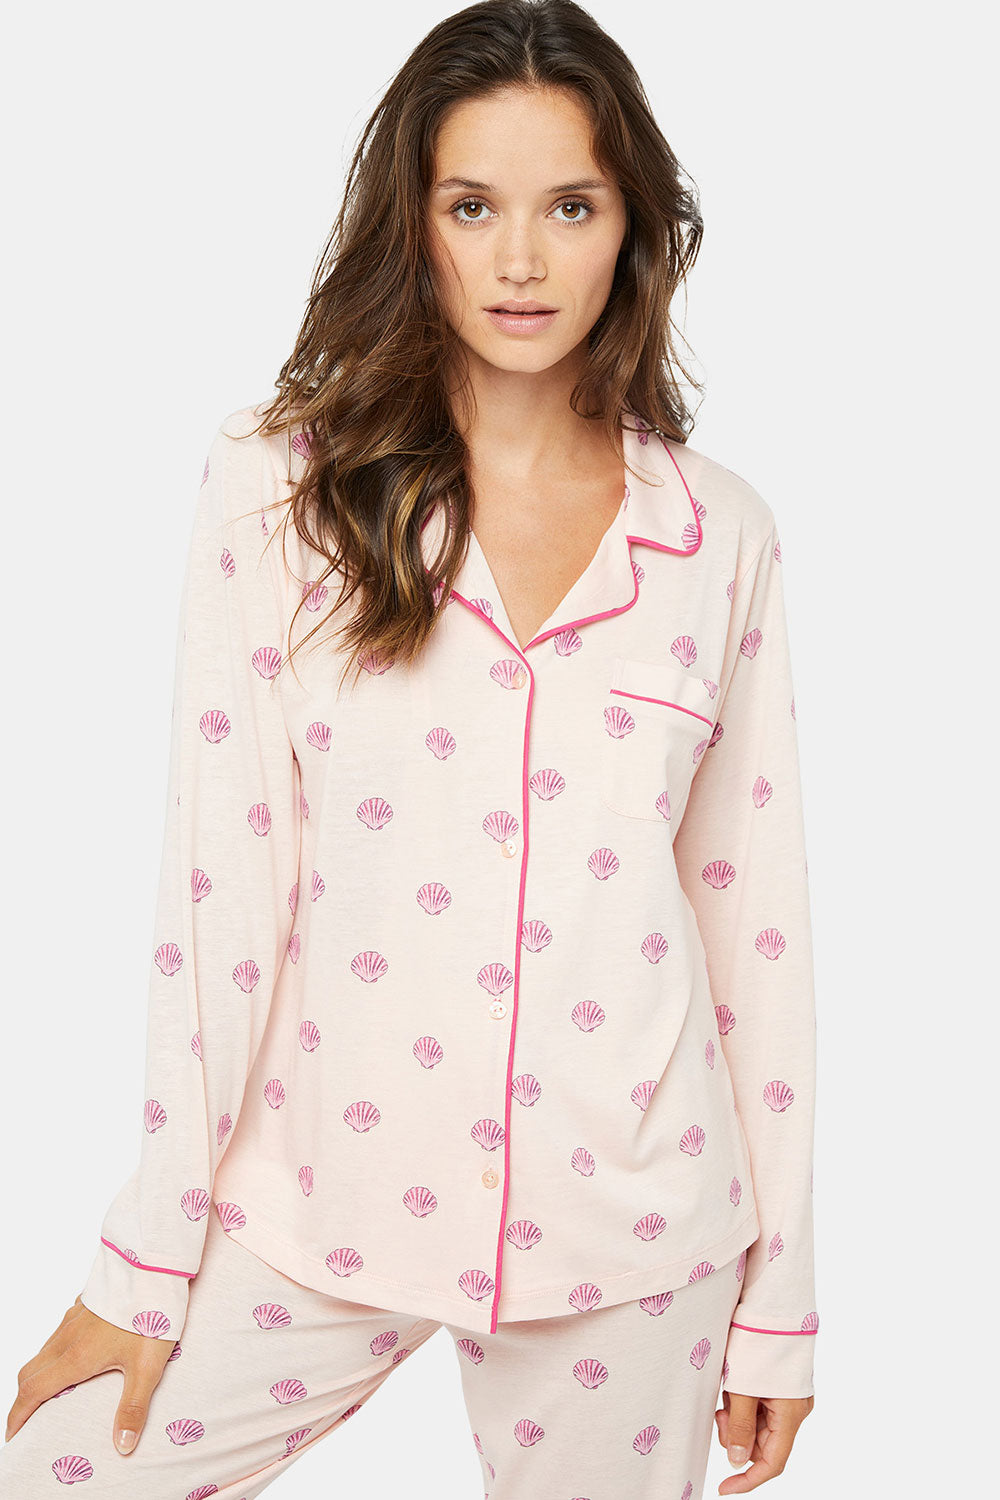 COQUILLAGE LONG BUTTONED PAJAMA